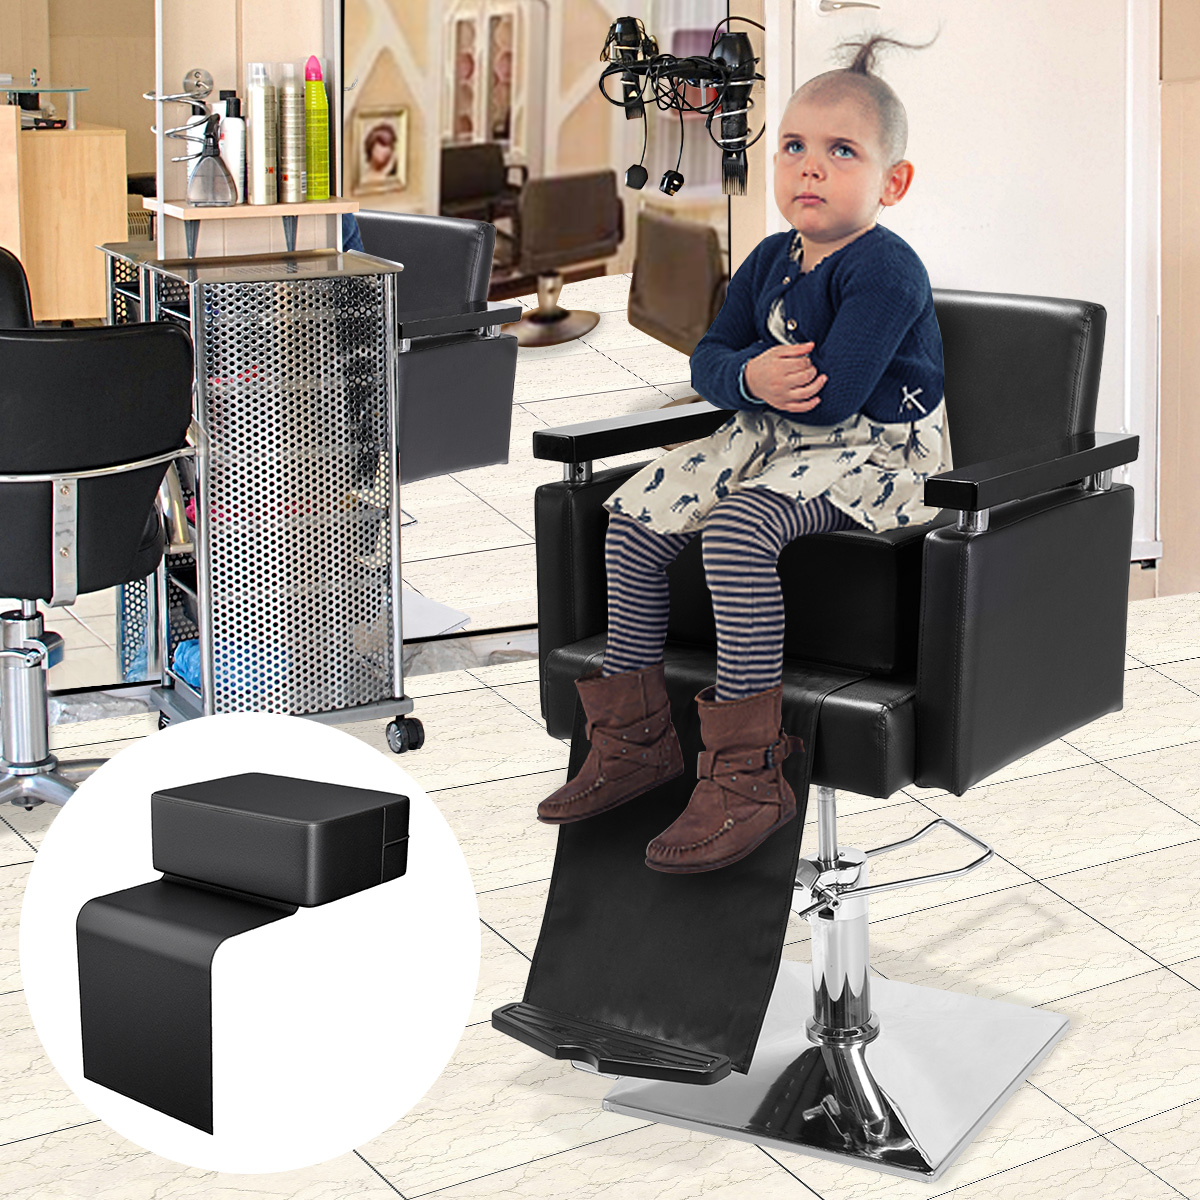 Dropship Child Salon Booster Seat Cushion For Hair Cutting, Beauty Salon  Spa Equipment, Cushion For Styling Chair, Black to Sell Online at a Lower  Price